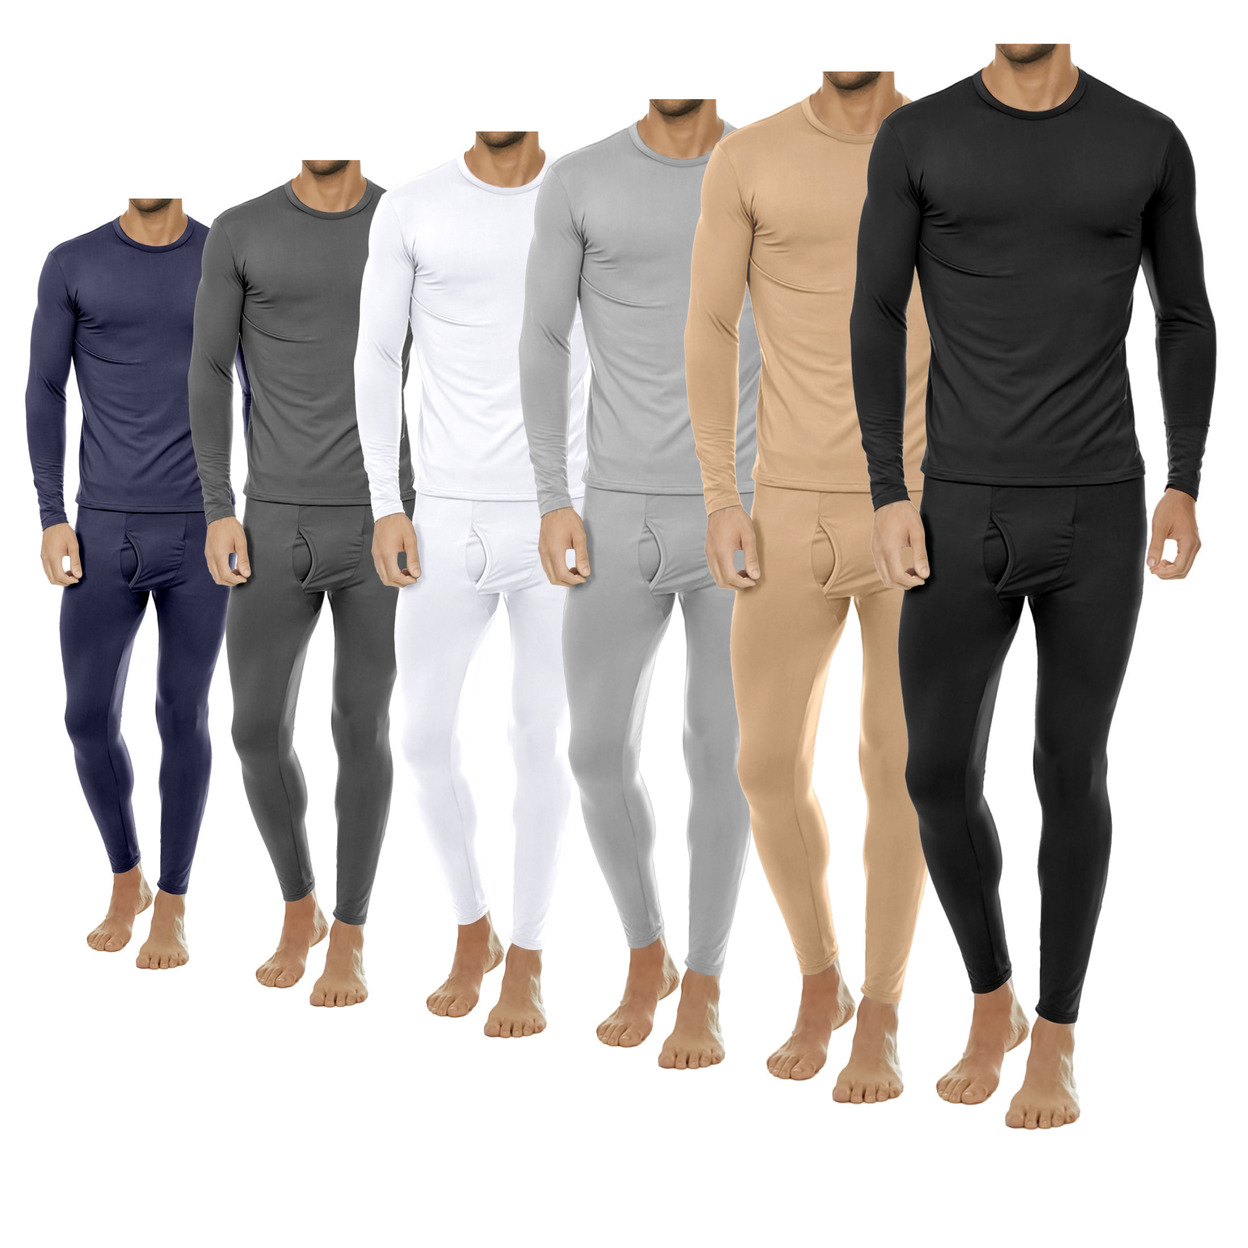 2-Sets: Men's Winter Warm Fleece Lined Thermal Underwear Set For Cold Weather - Grey&grey, Small